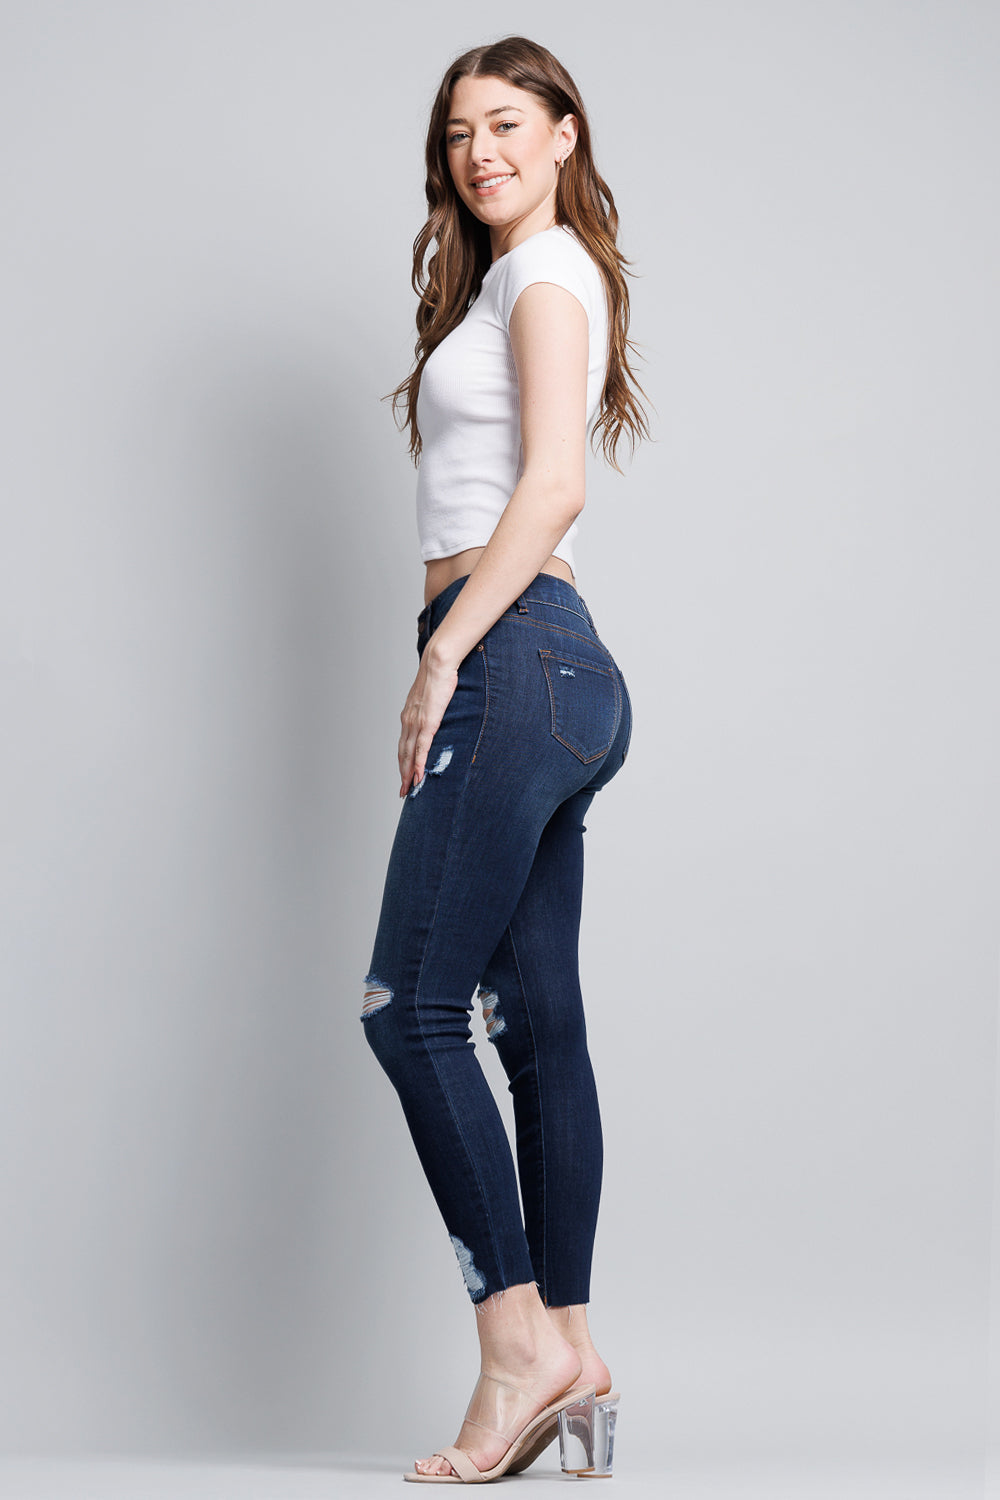 Distressed Mid Rise Skinny Jeans with Chewed Hems